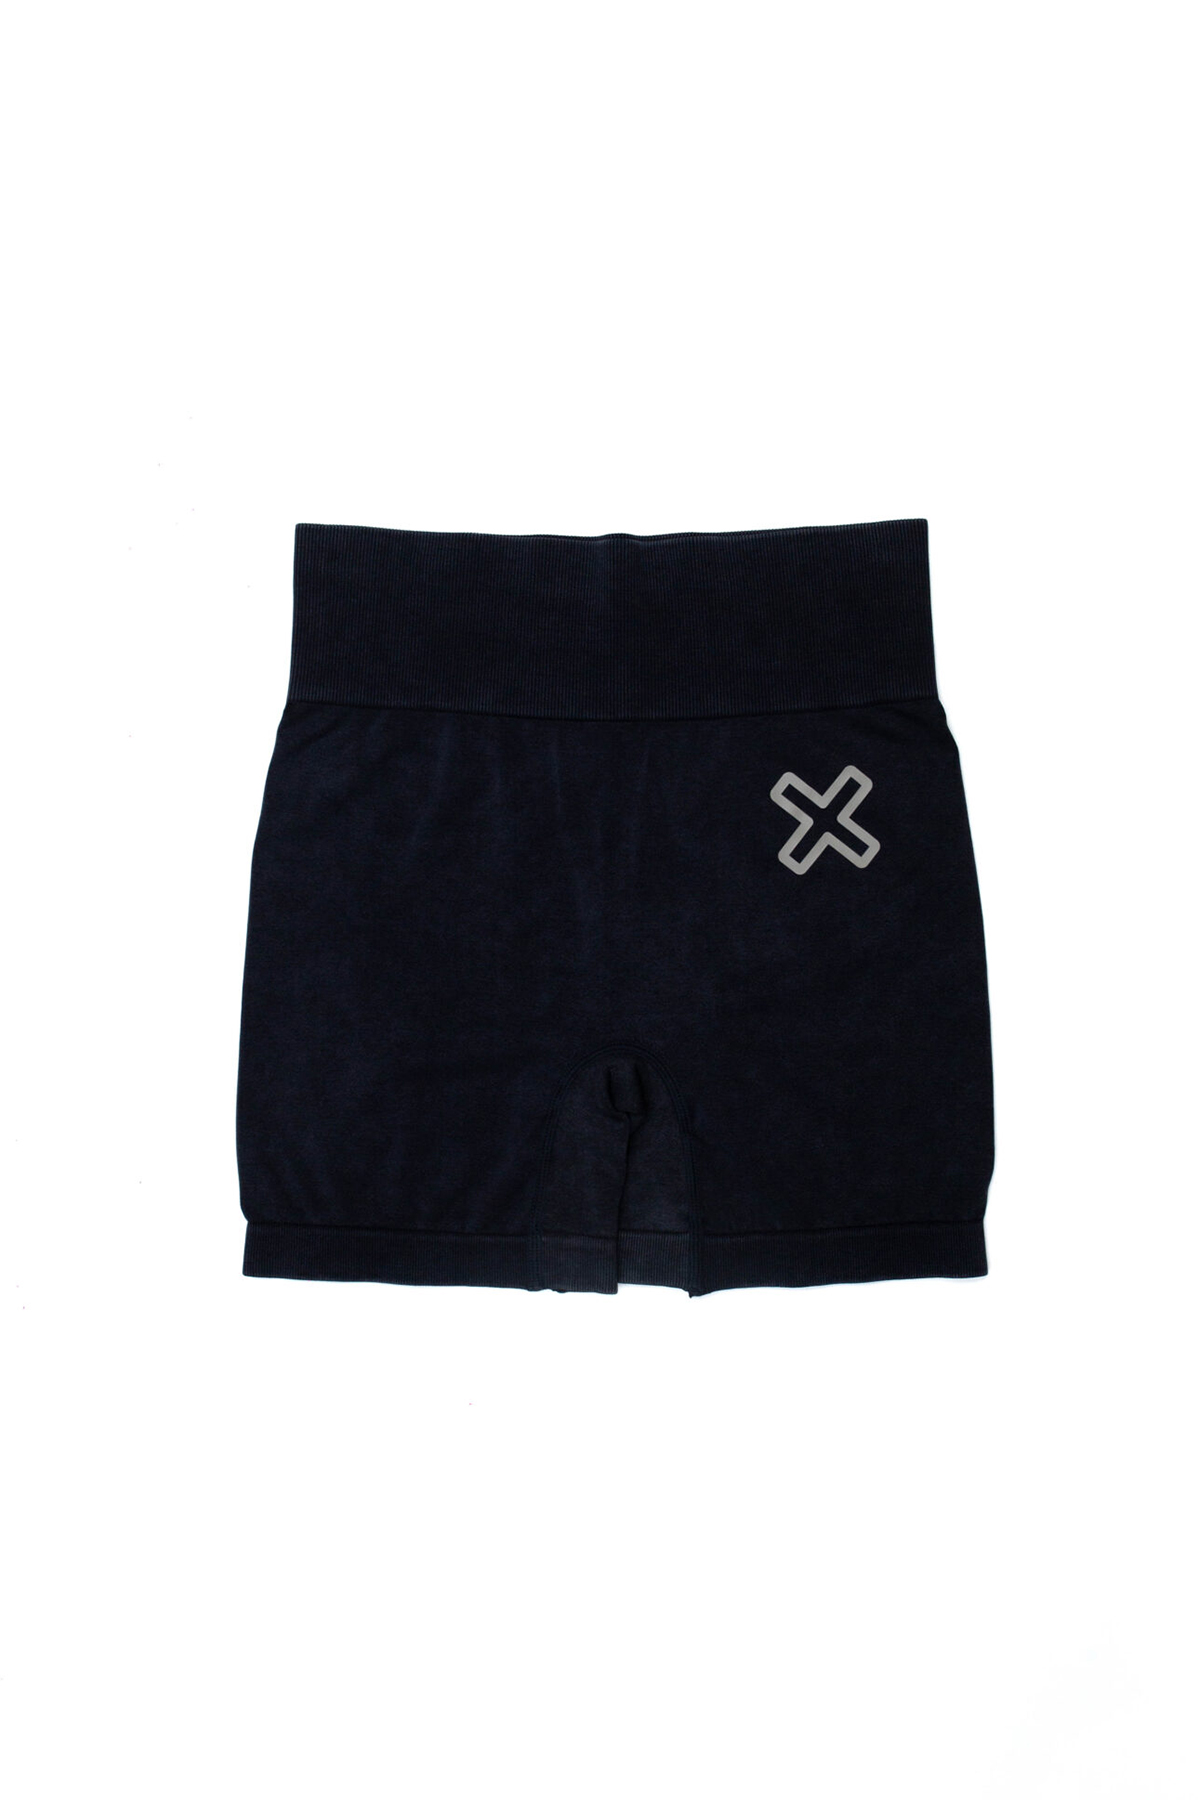 Time-Out-X-High-Waist-Seamless-Workout-Shorts—Black—Front